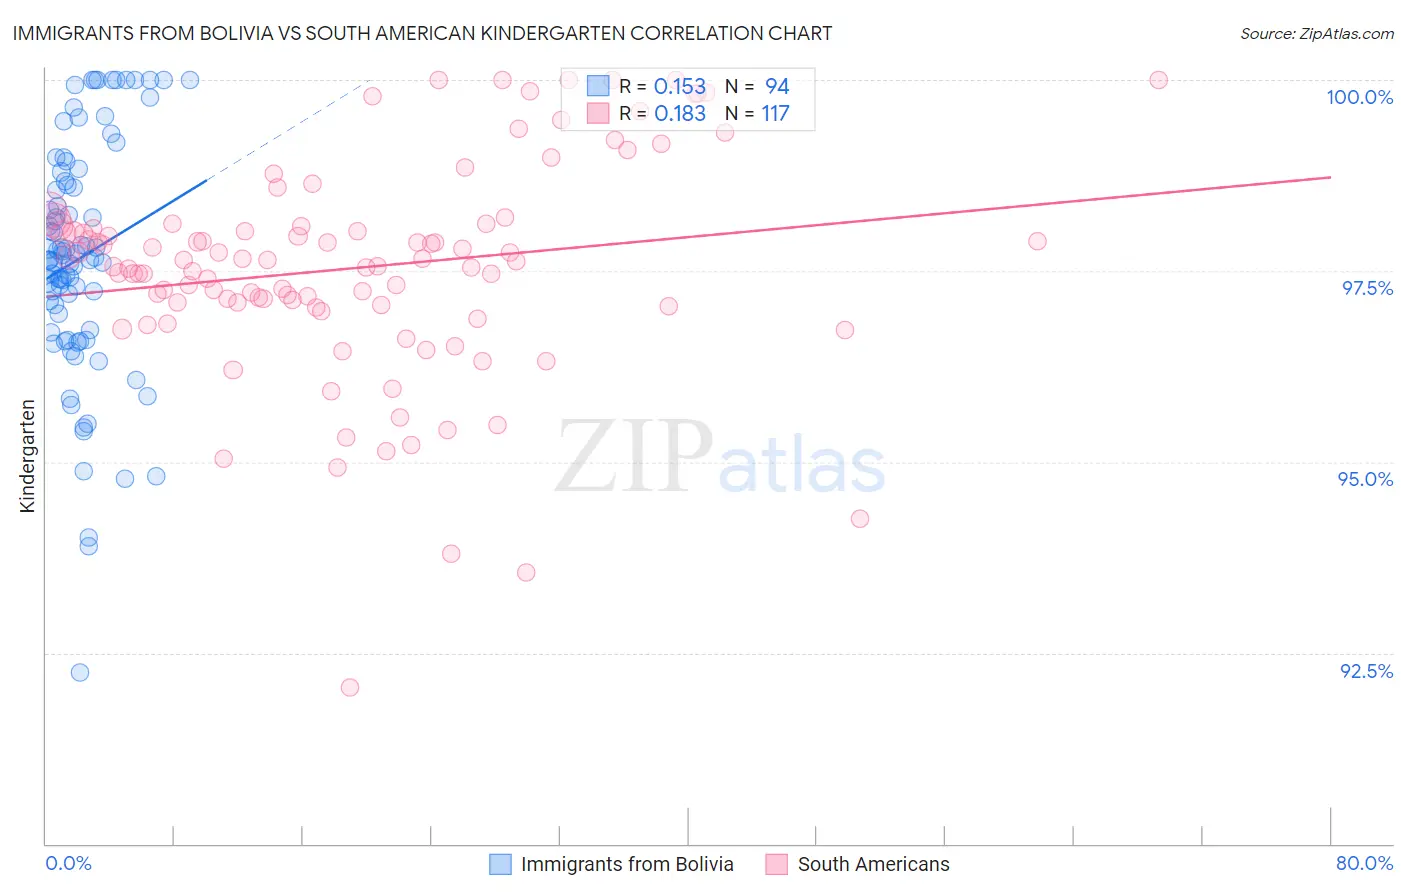 Immigrants from Bolivia vs South American Kindergarten